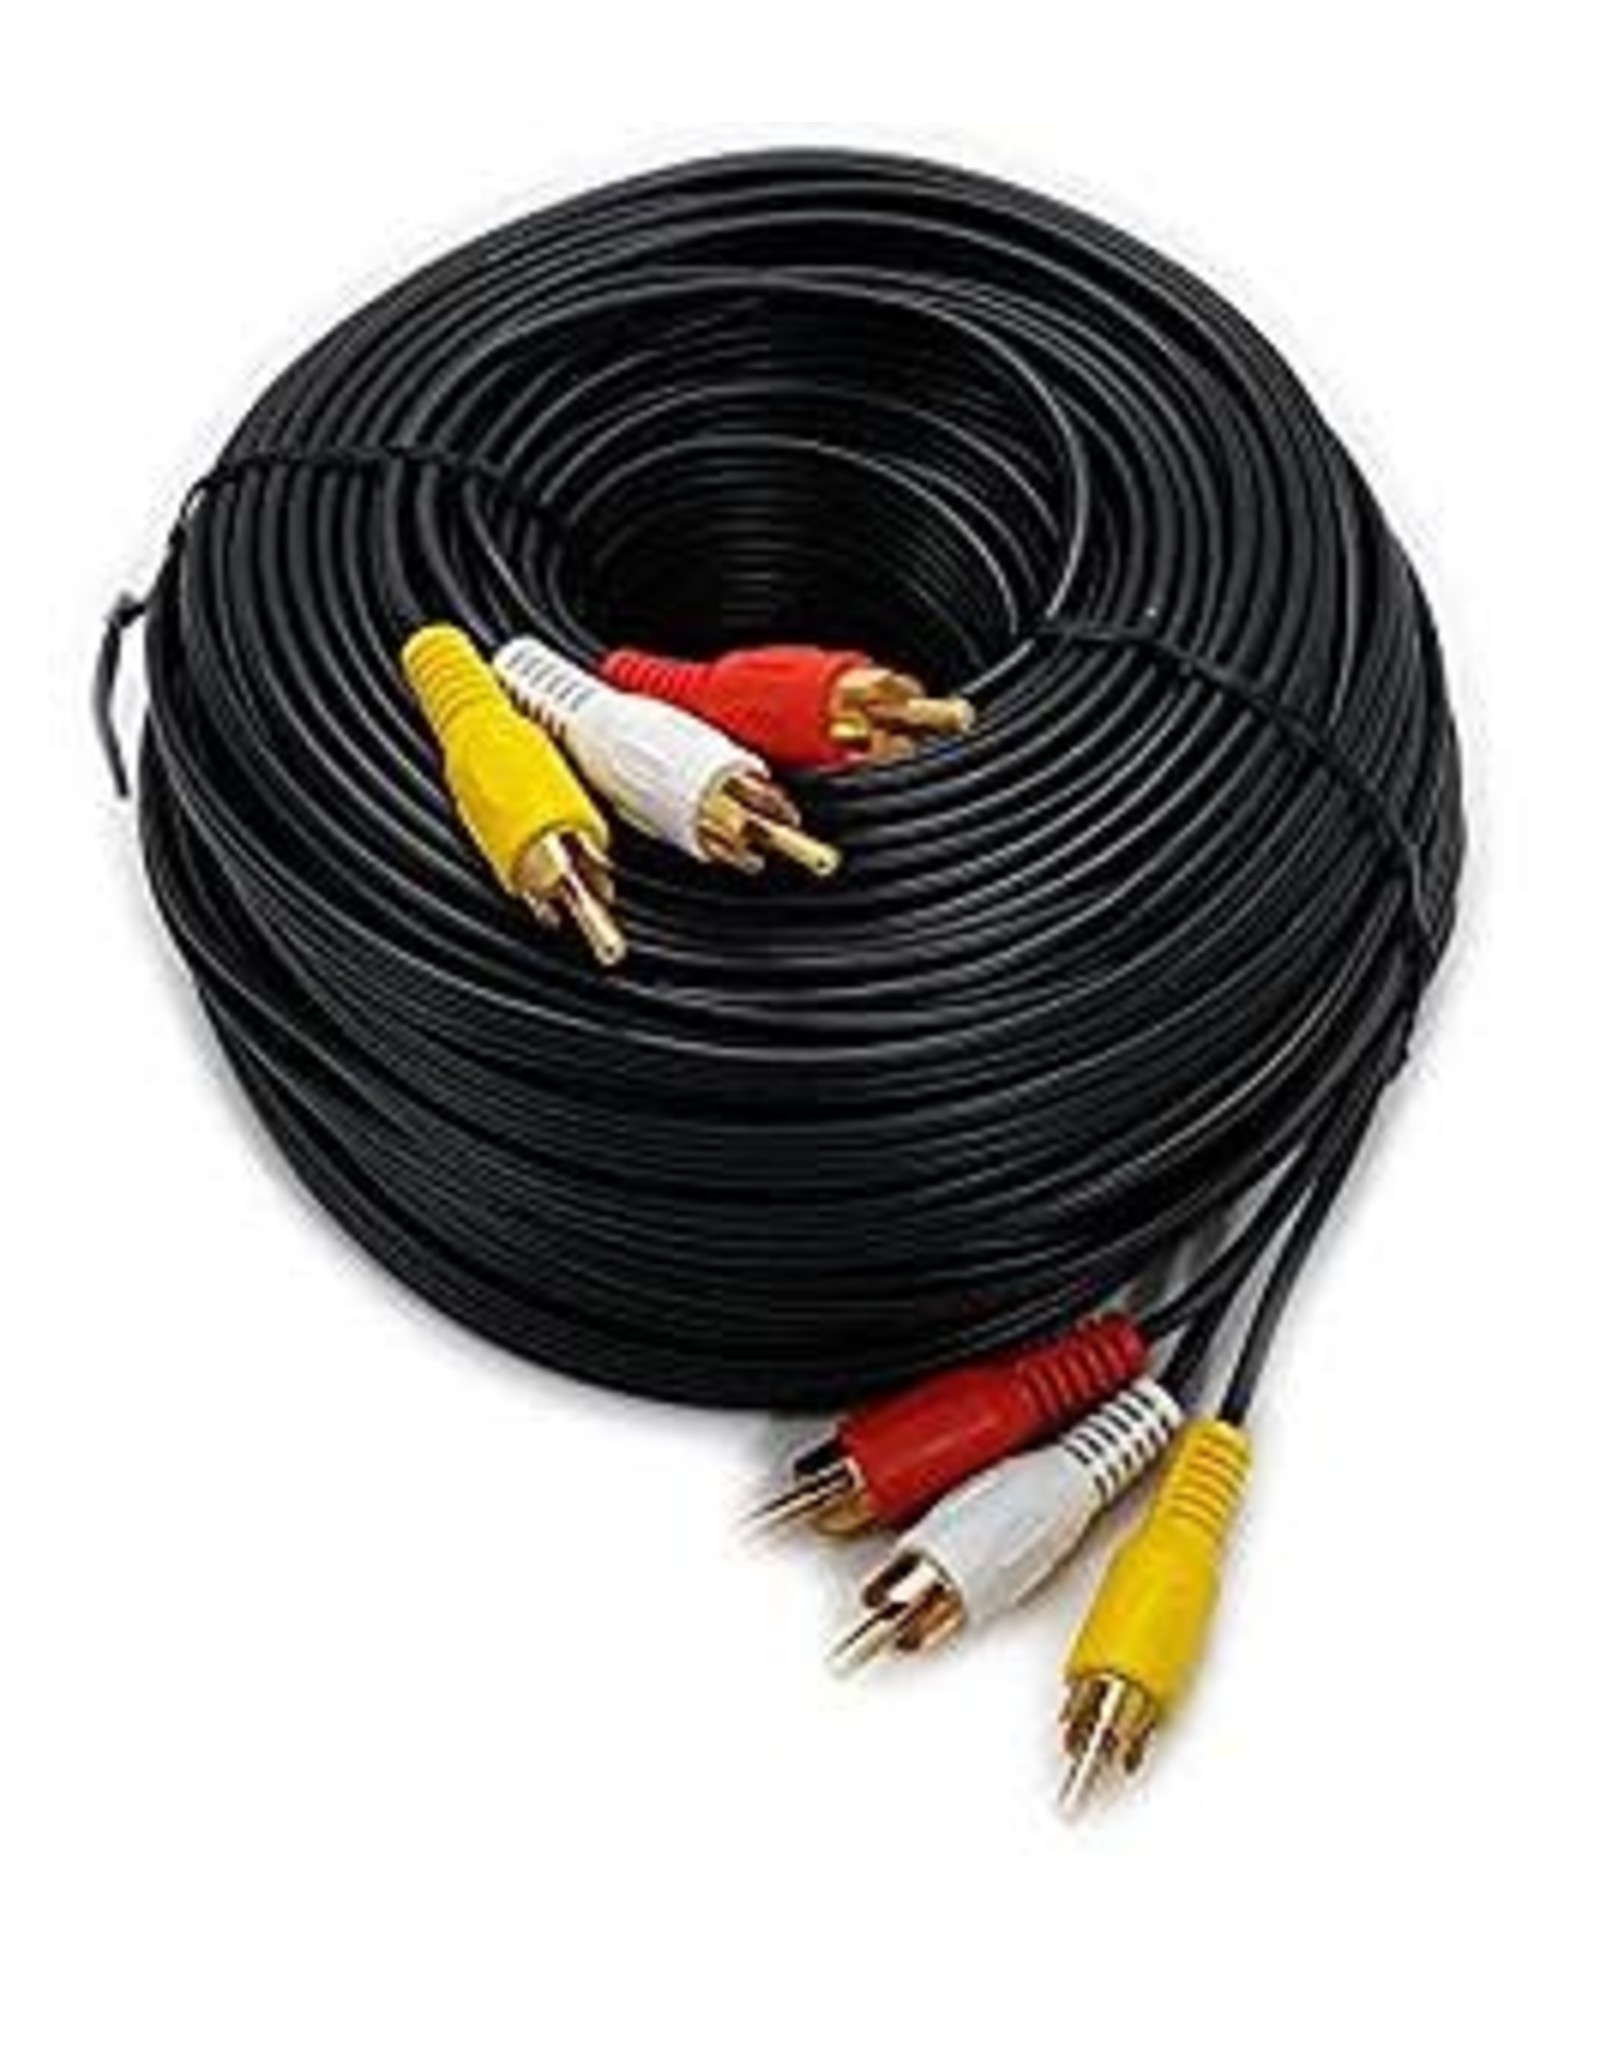 iMBAPrice (100 Feet Long 3RCA Composite Video Audio A/V AV Cable - Gold Plate